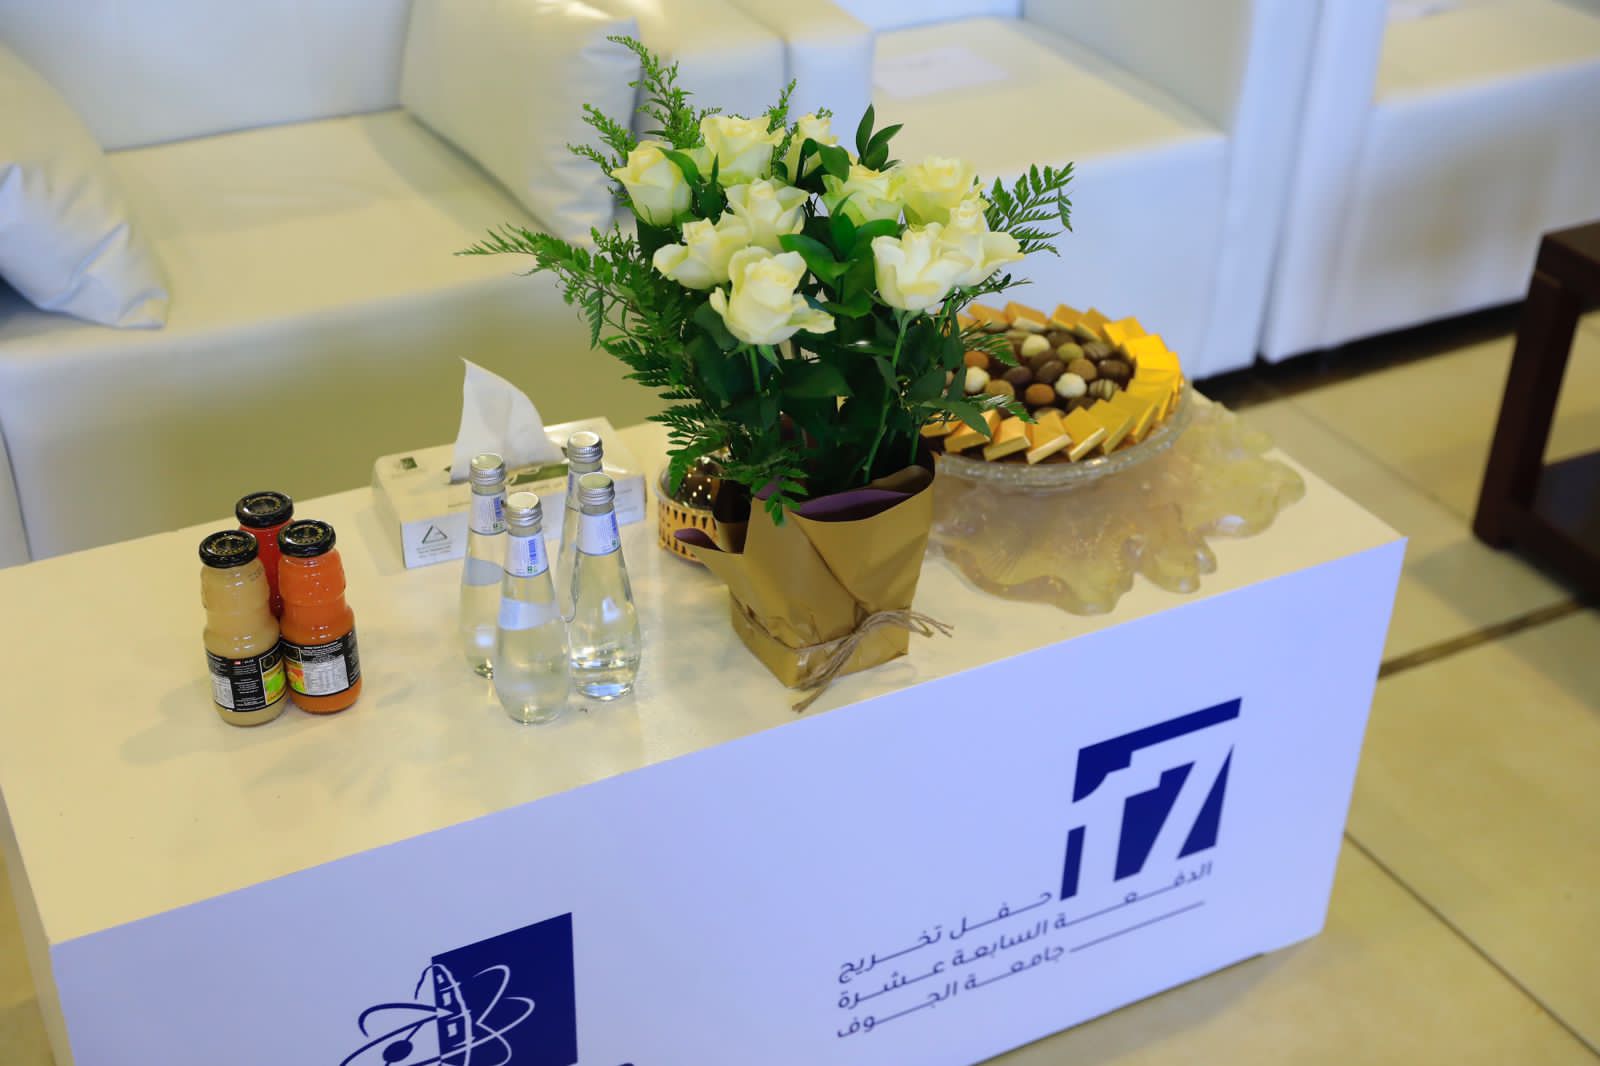 The Girls College Complex in Qurayyat celebrates the graduation of the 17th batch